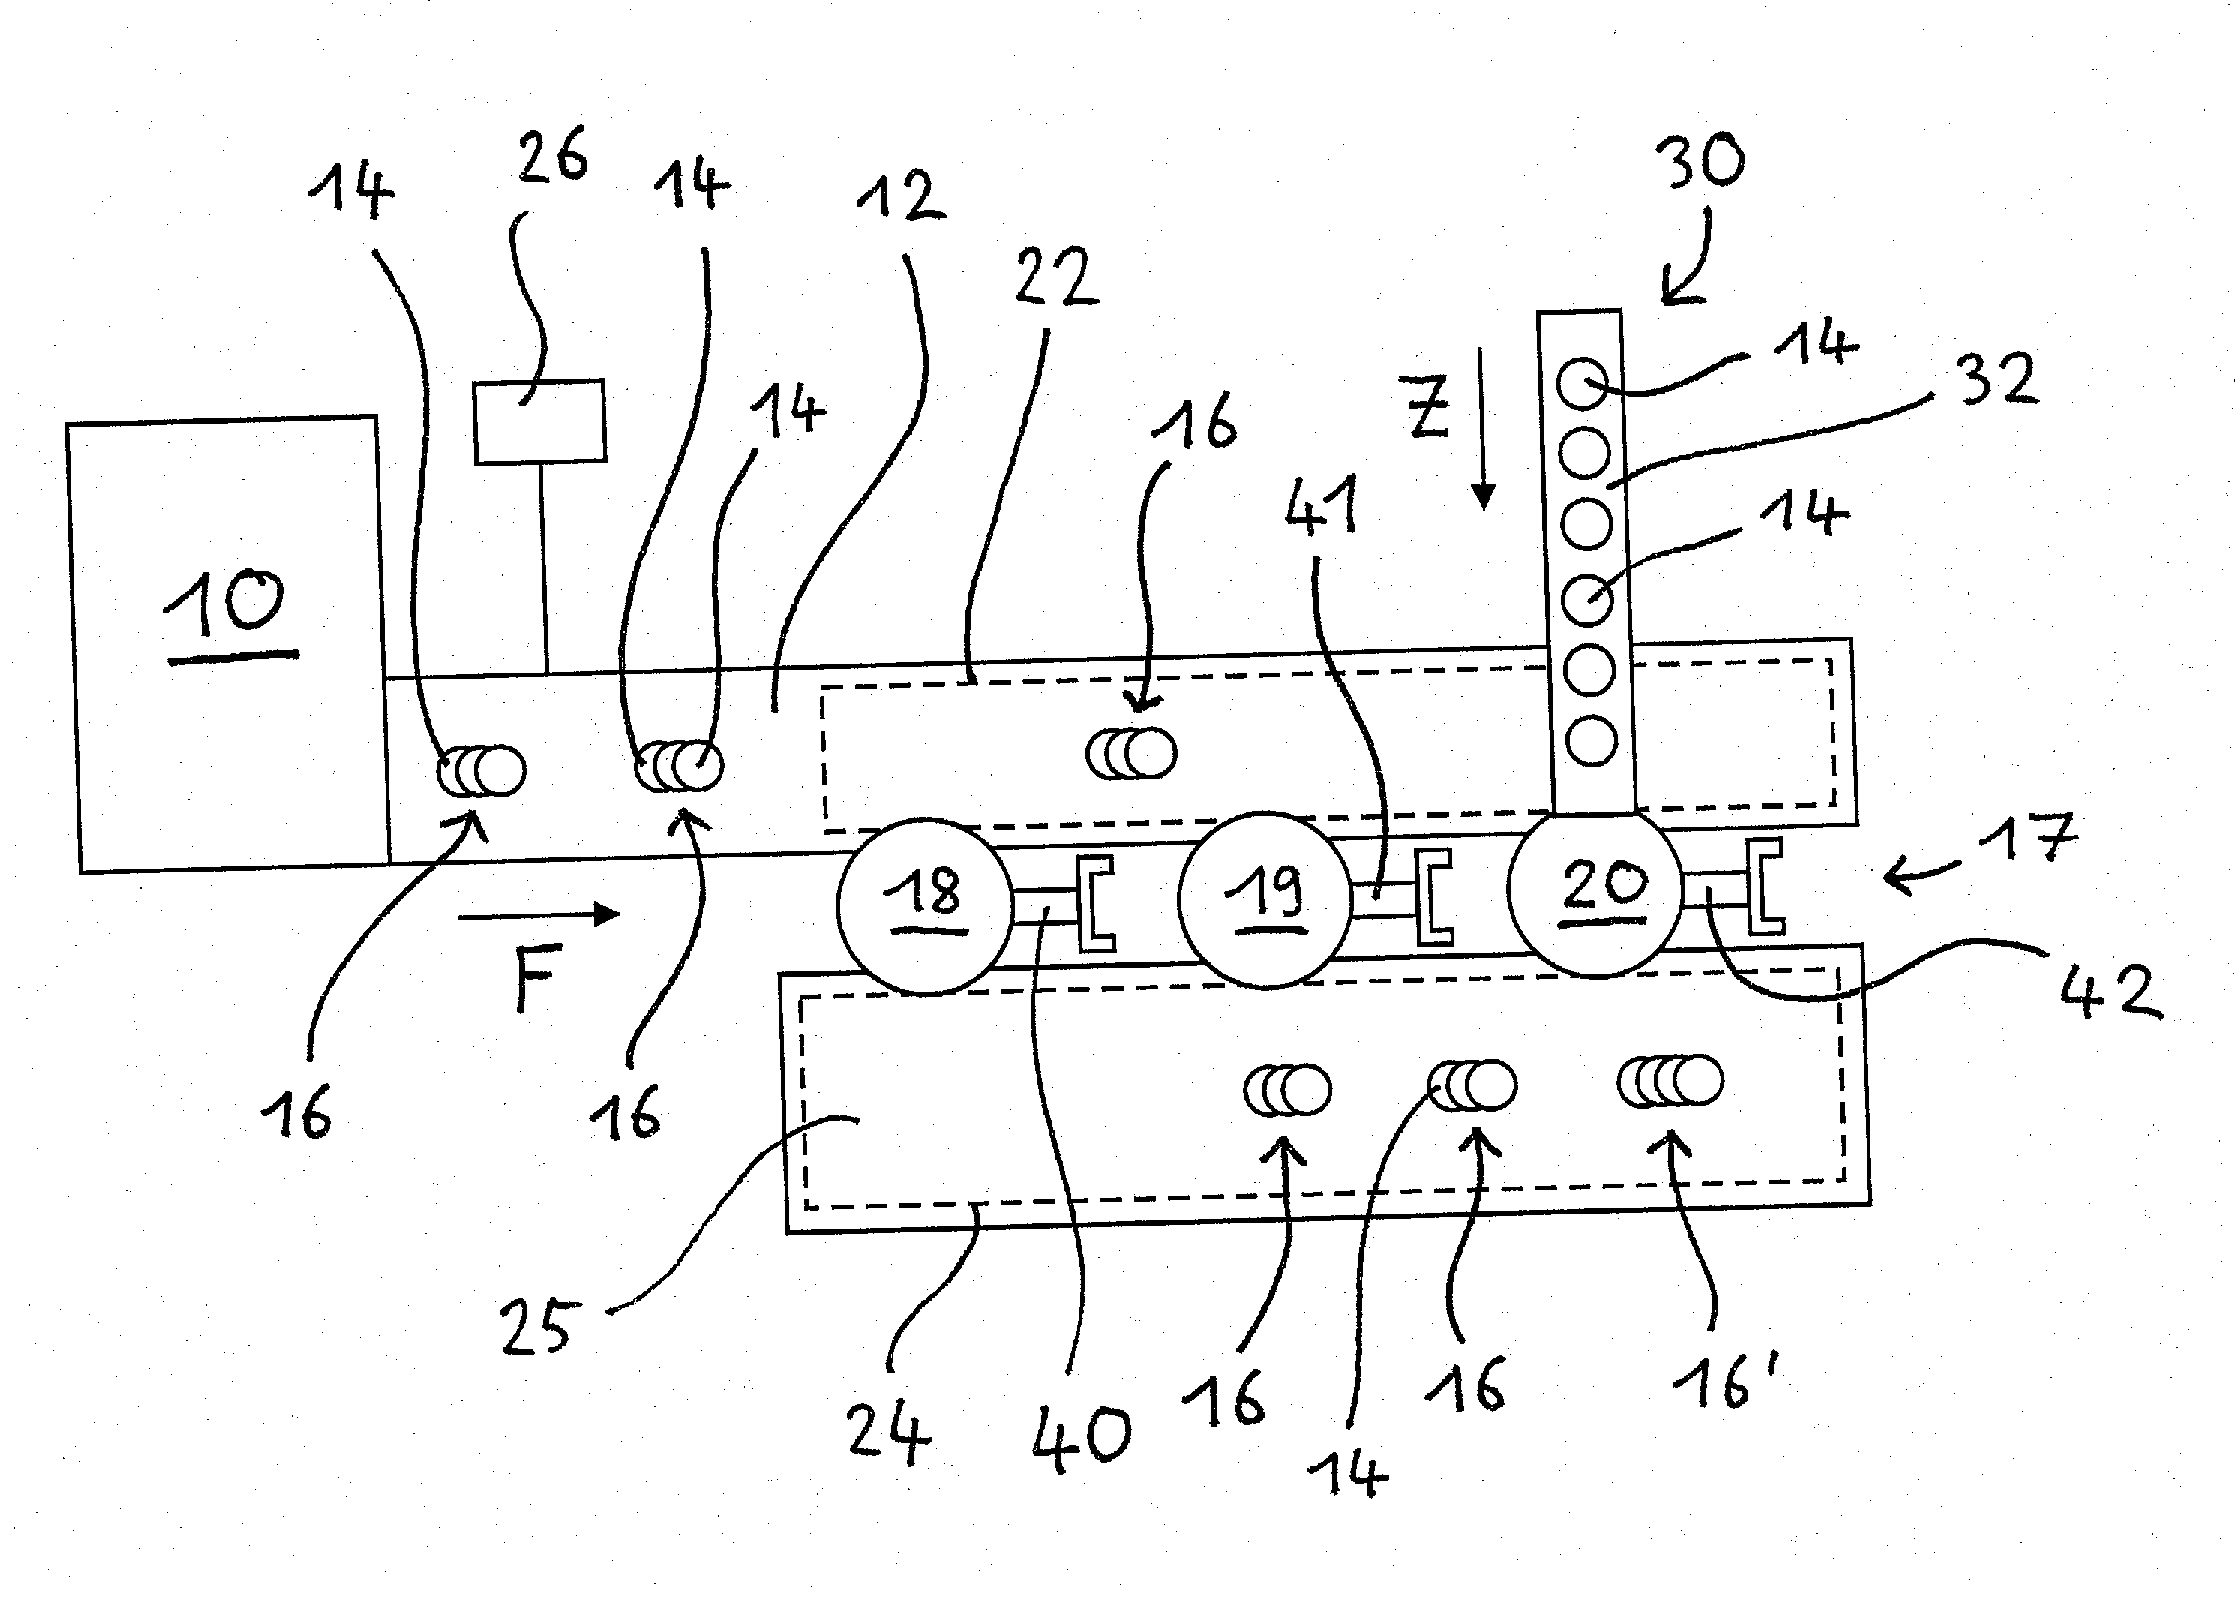 Apparatus for handling portions of products